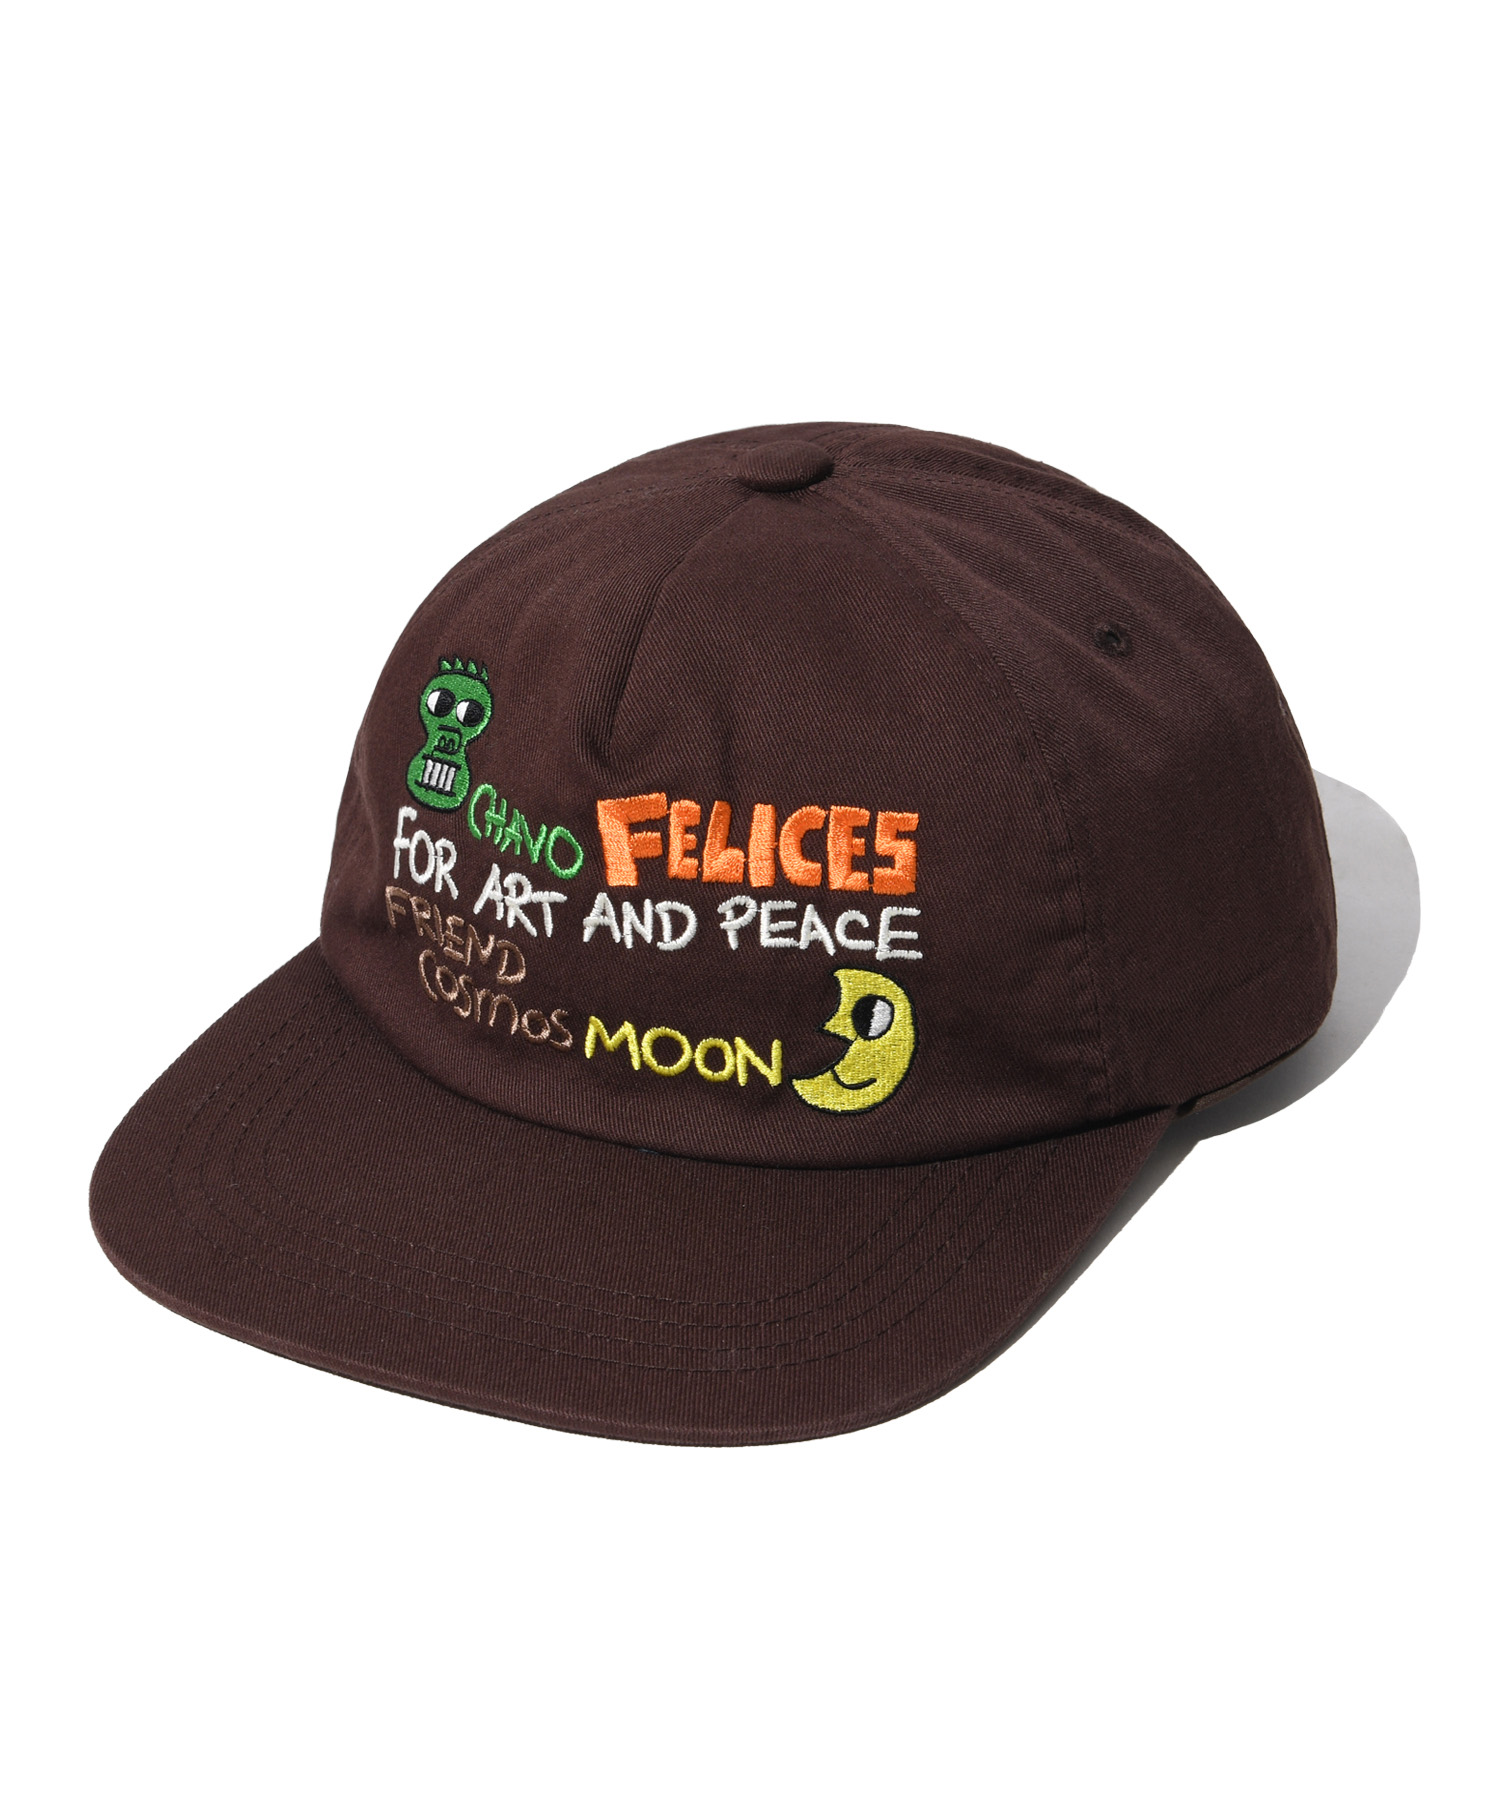 MOON FOR ART AND PEACE 5 PANEL CAP BROWN